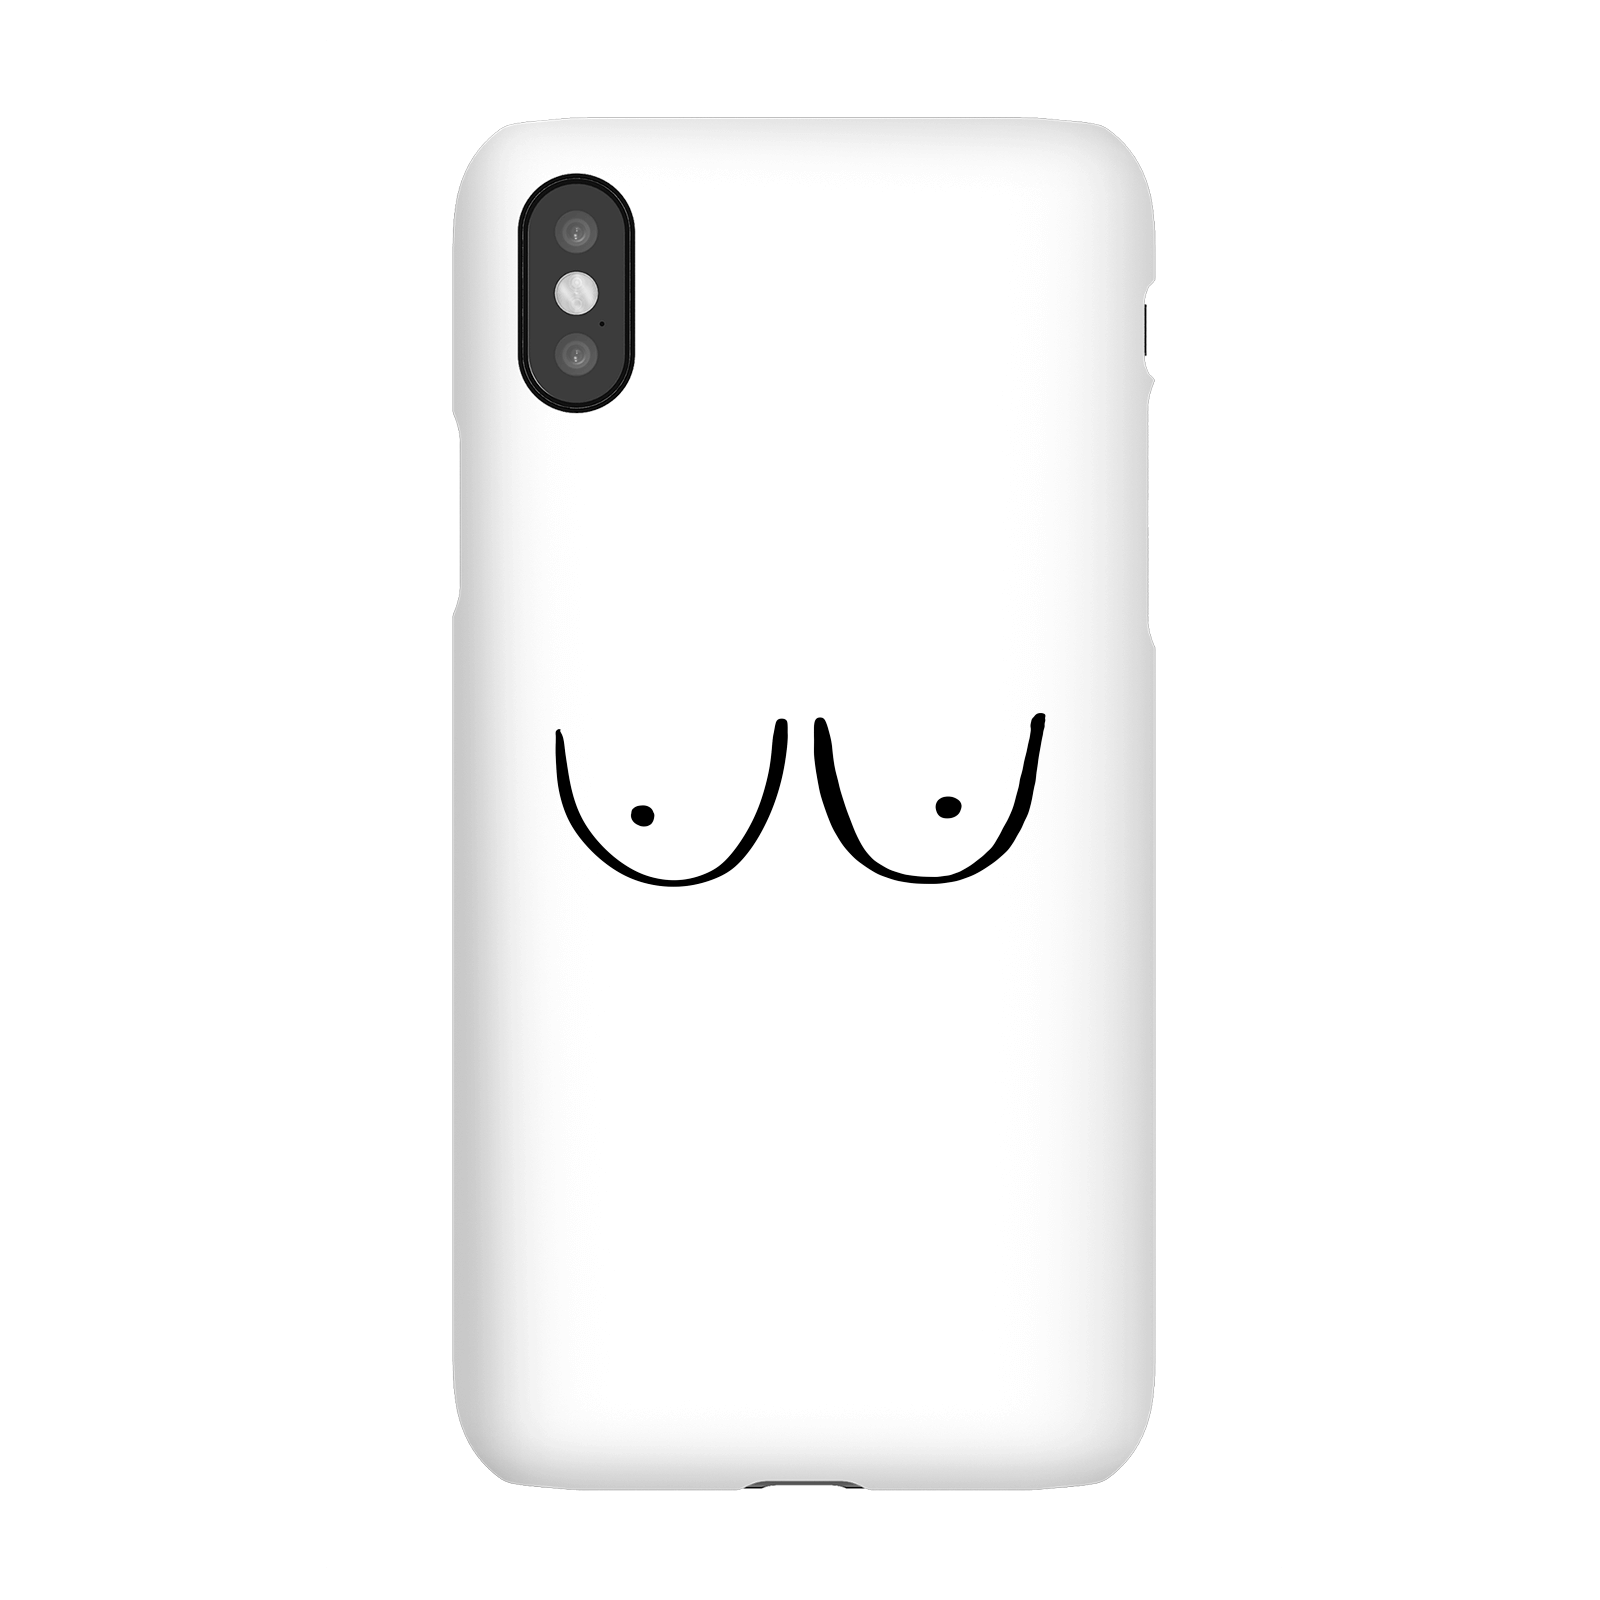 Boobs Phone Case for iPhone and Android - iPhone 5/5s - Snap Case - Matte